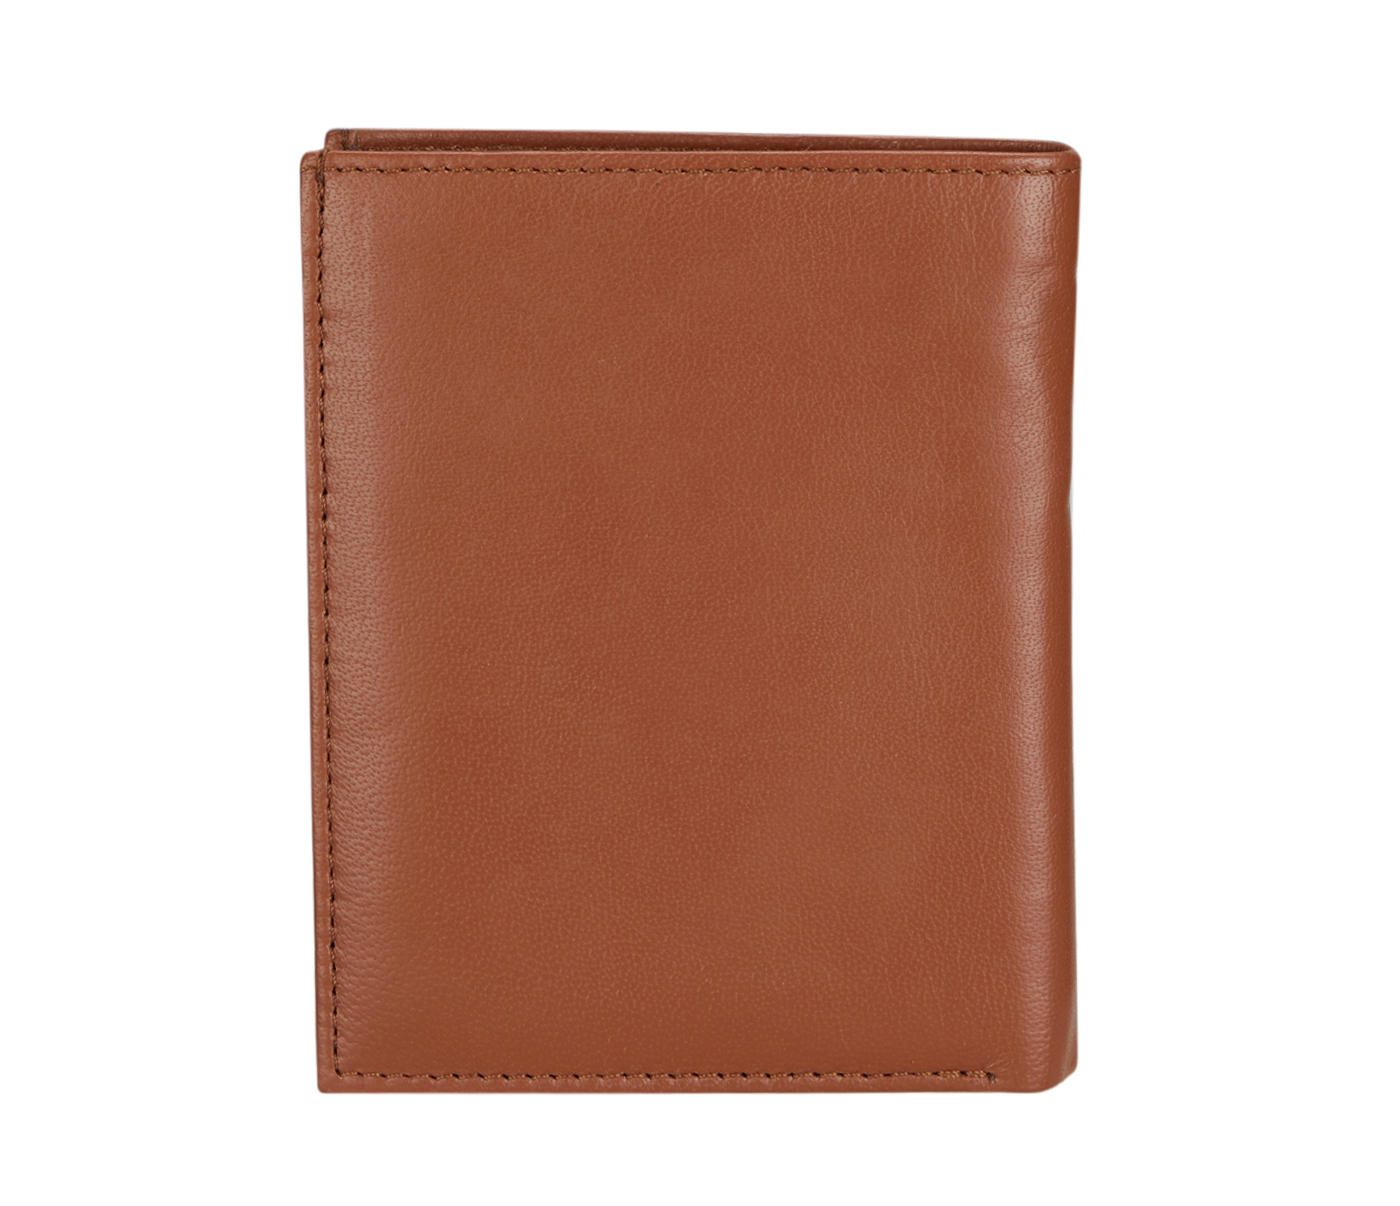 W7-Davide-Men's Bifold Wallet With Photo Id In Genuine Leather - Tan